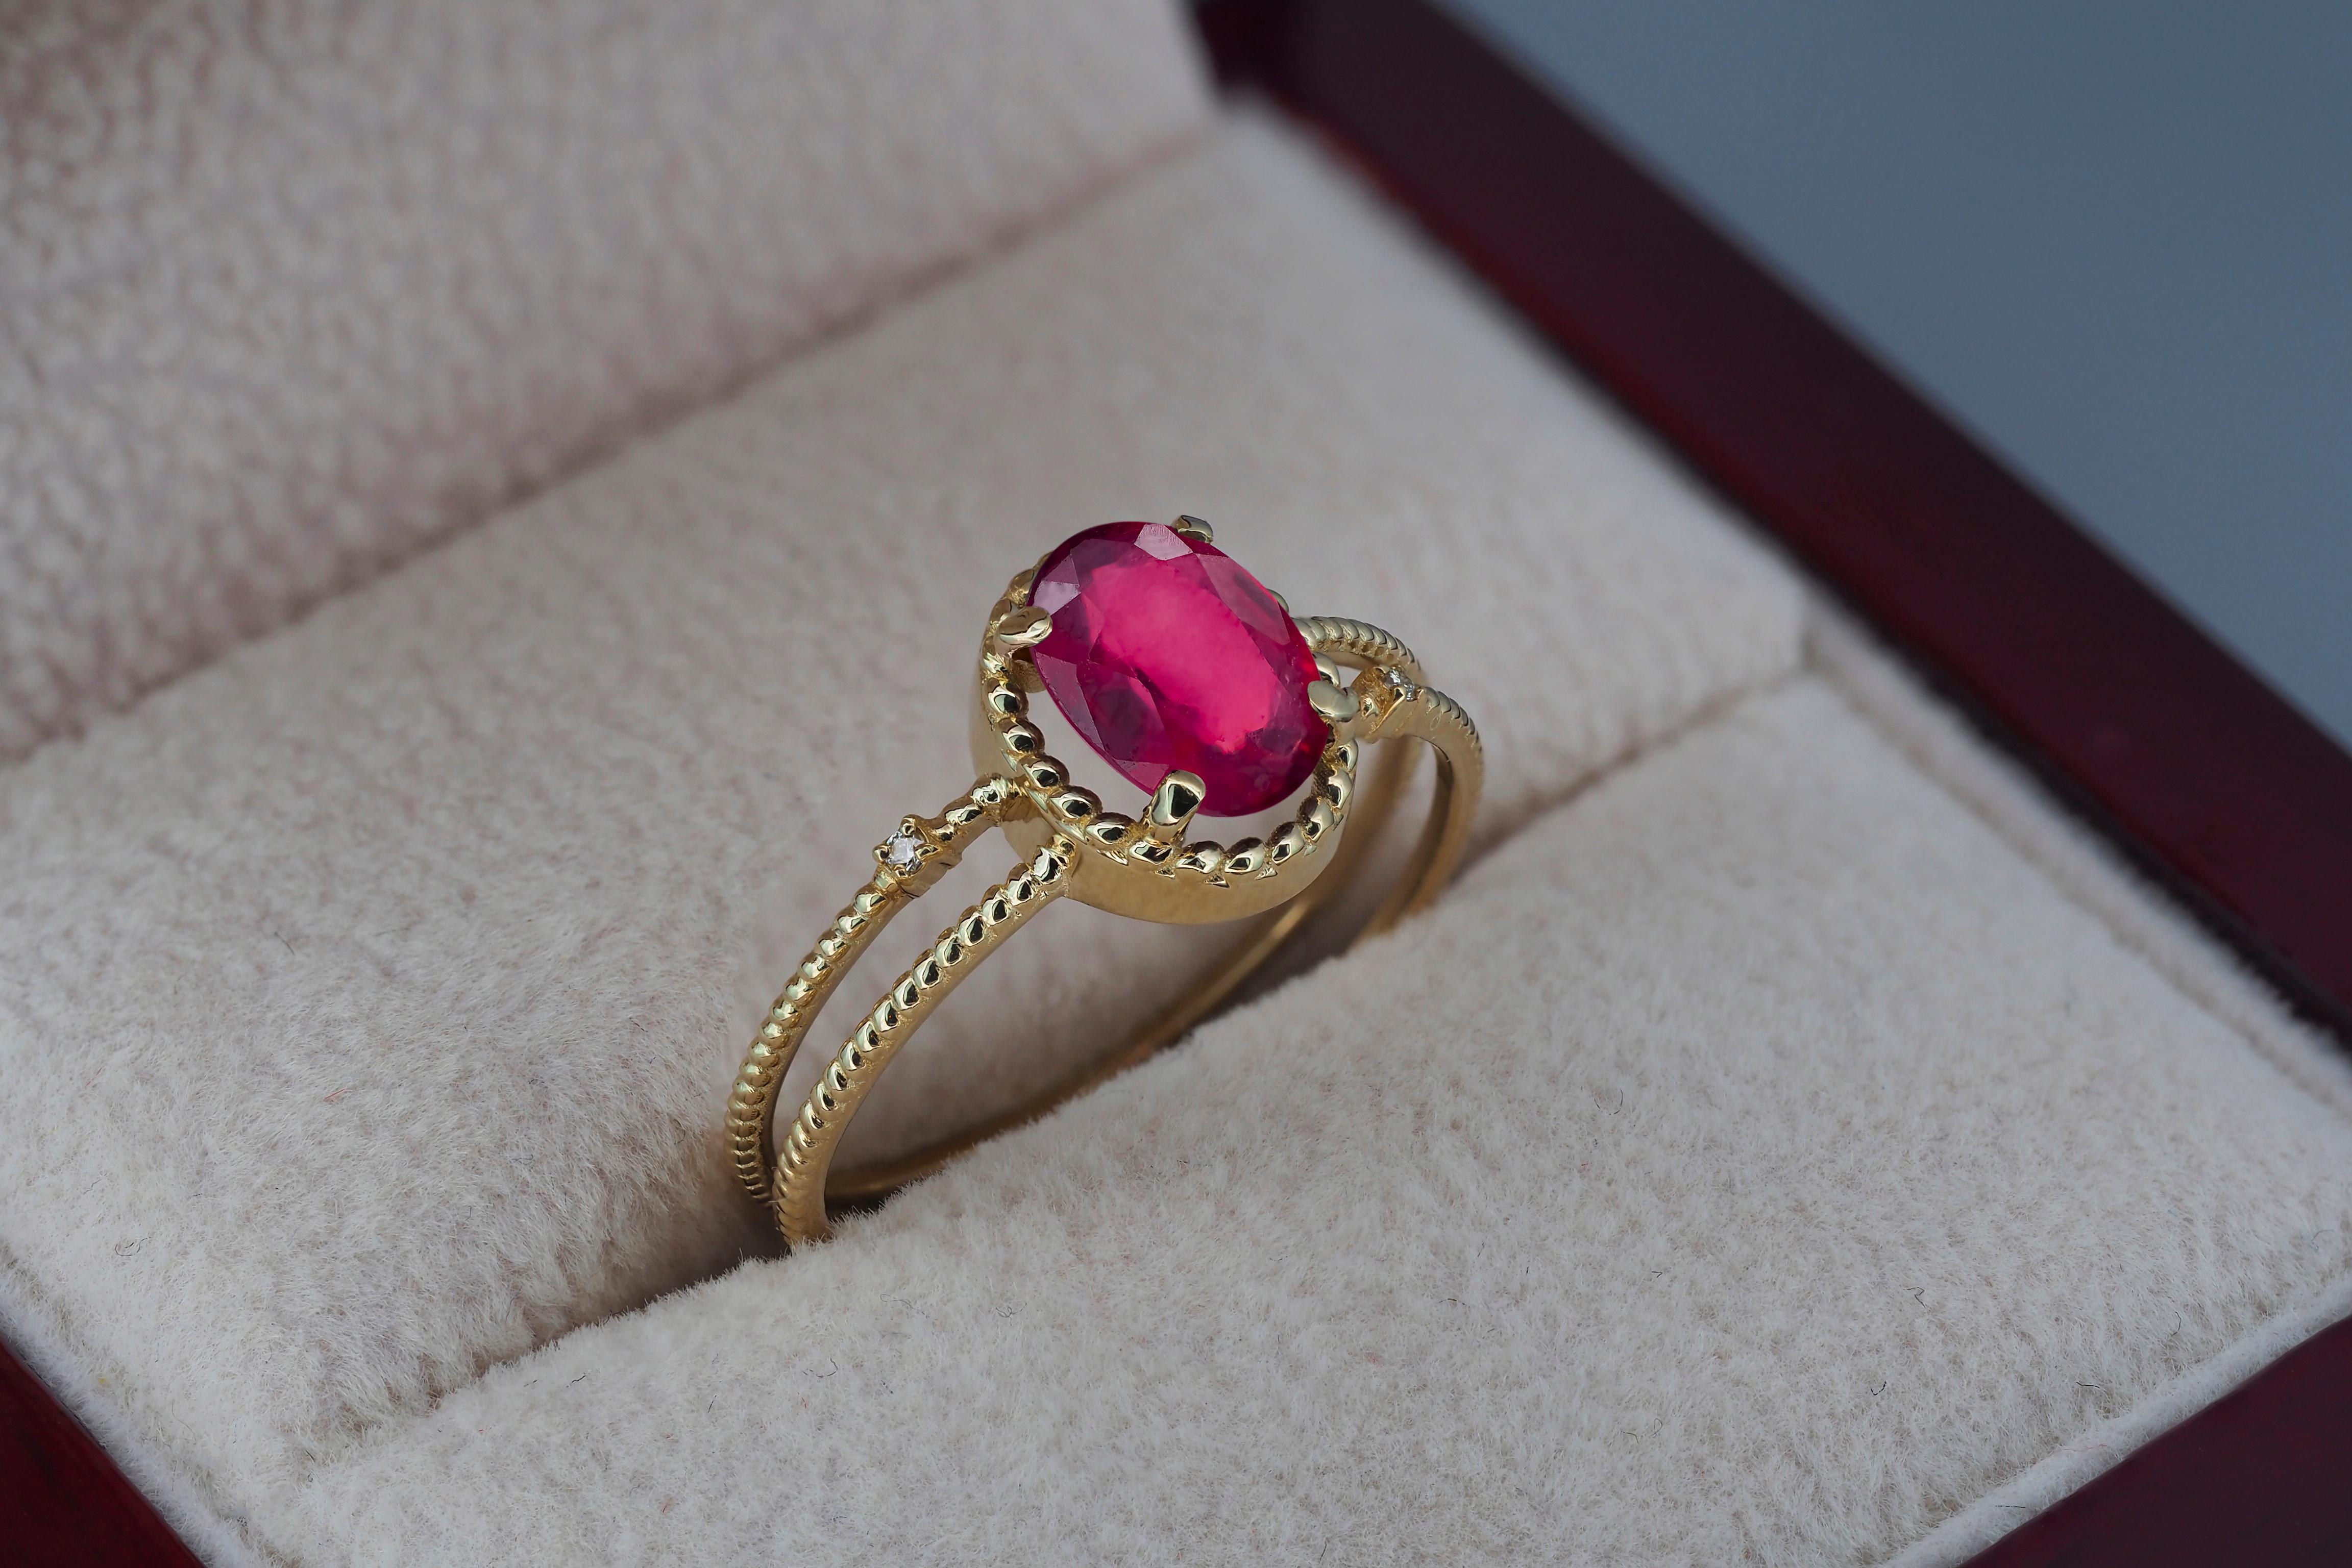 For Sale:  Oval Ruby Ring, 14k Gold Ring with Ruby, Minimalist Ruby Ring 5